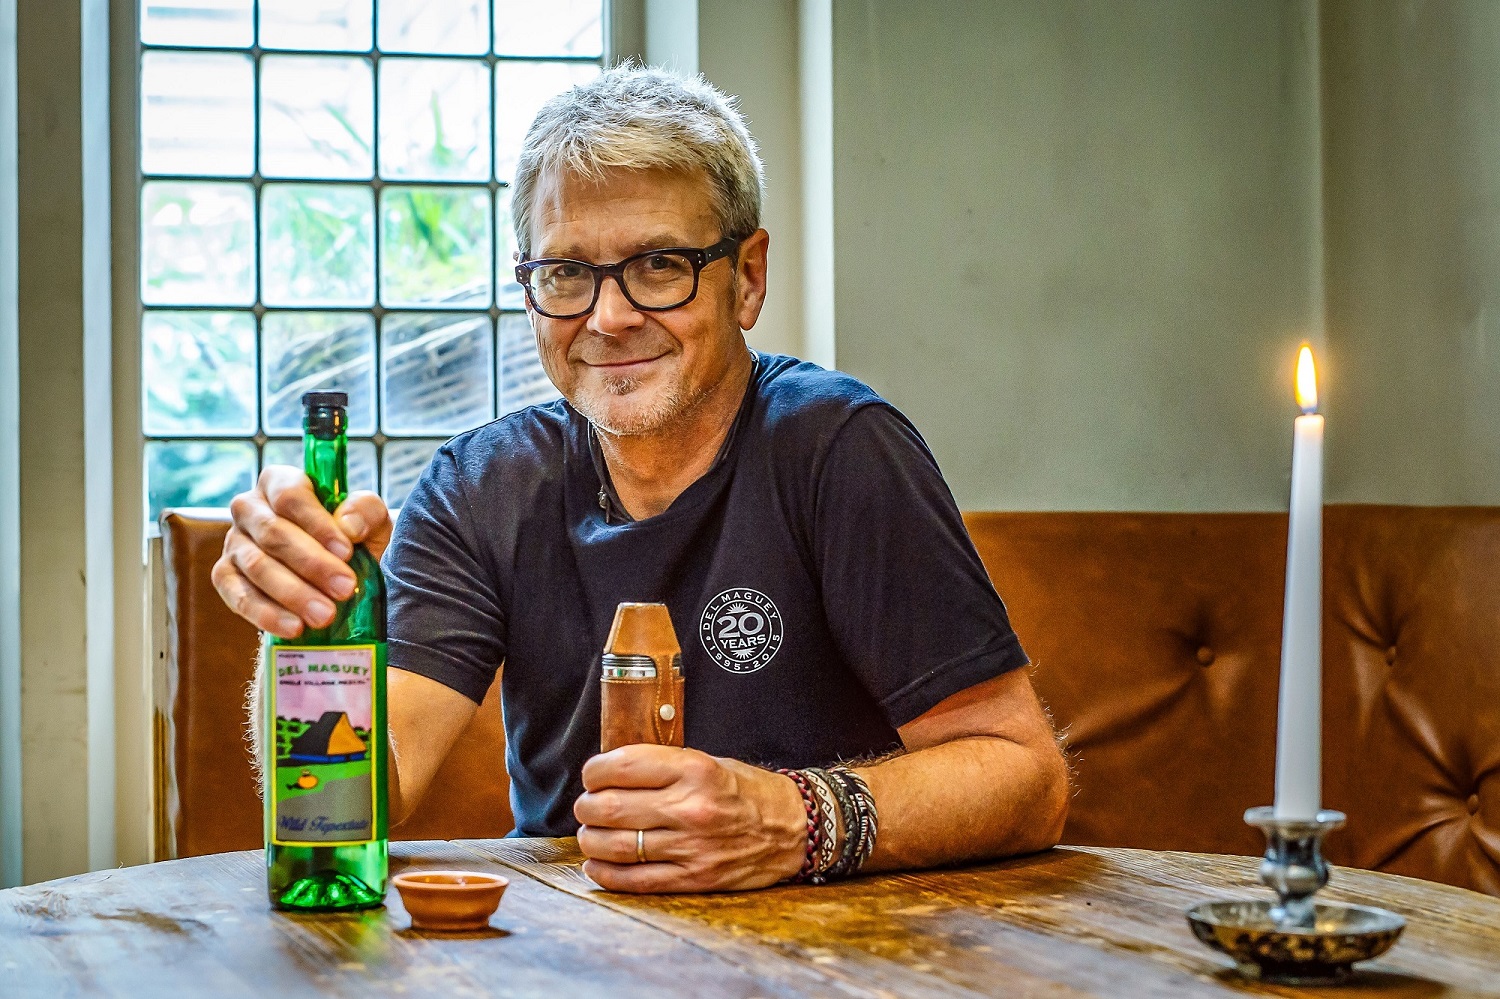 Steve Olson is responsible for finding and bottling some of Mexico's greatest spirits